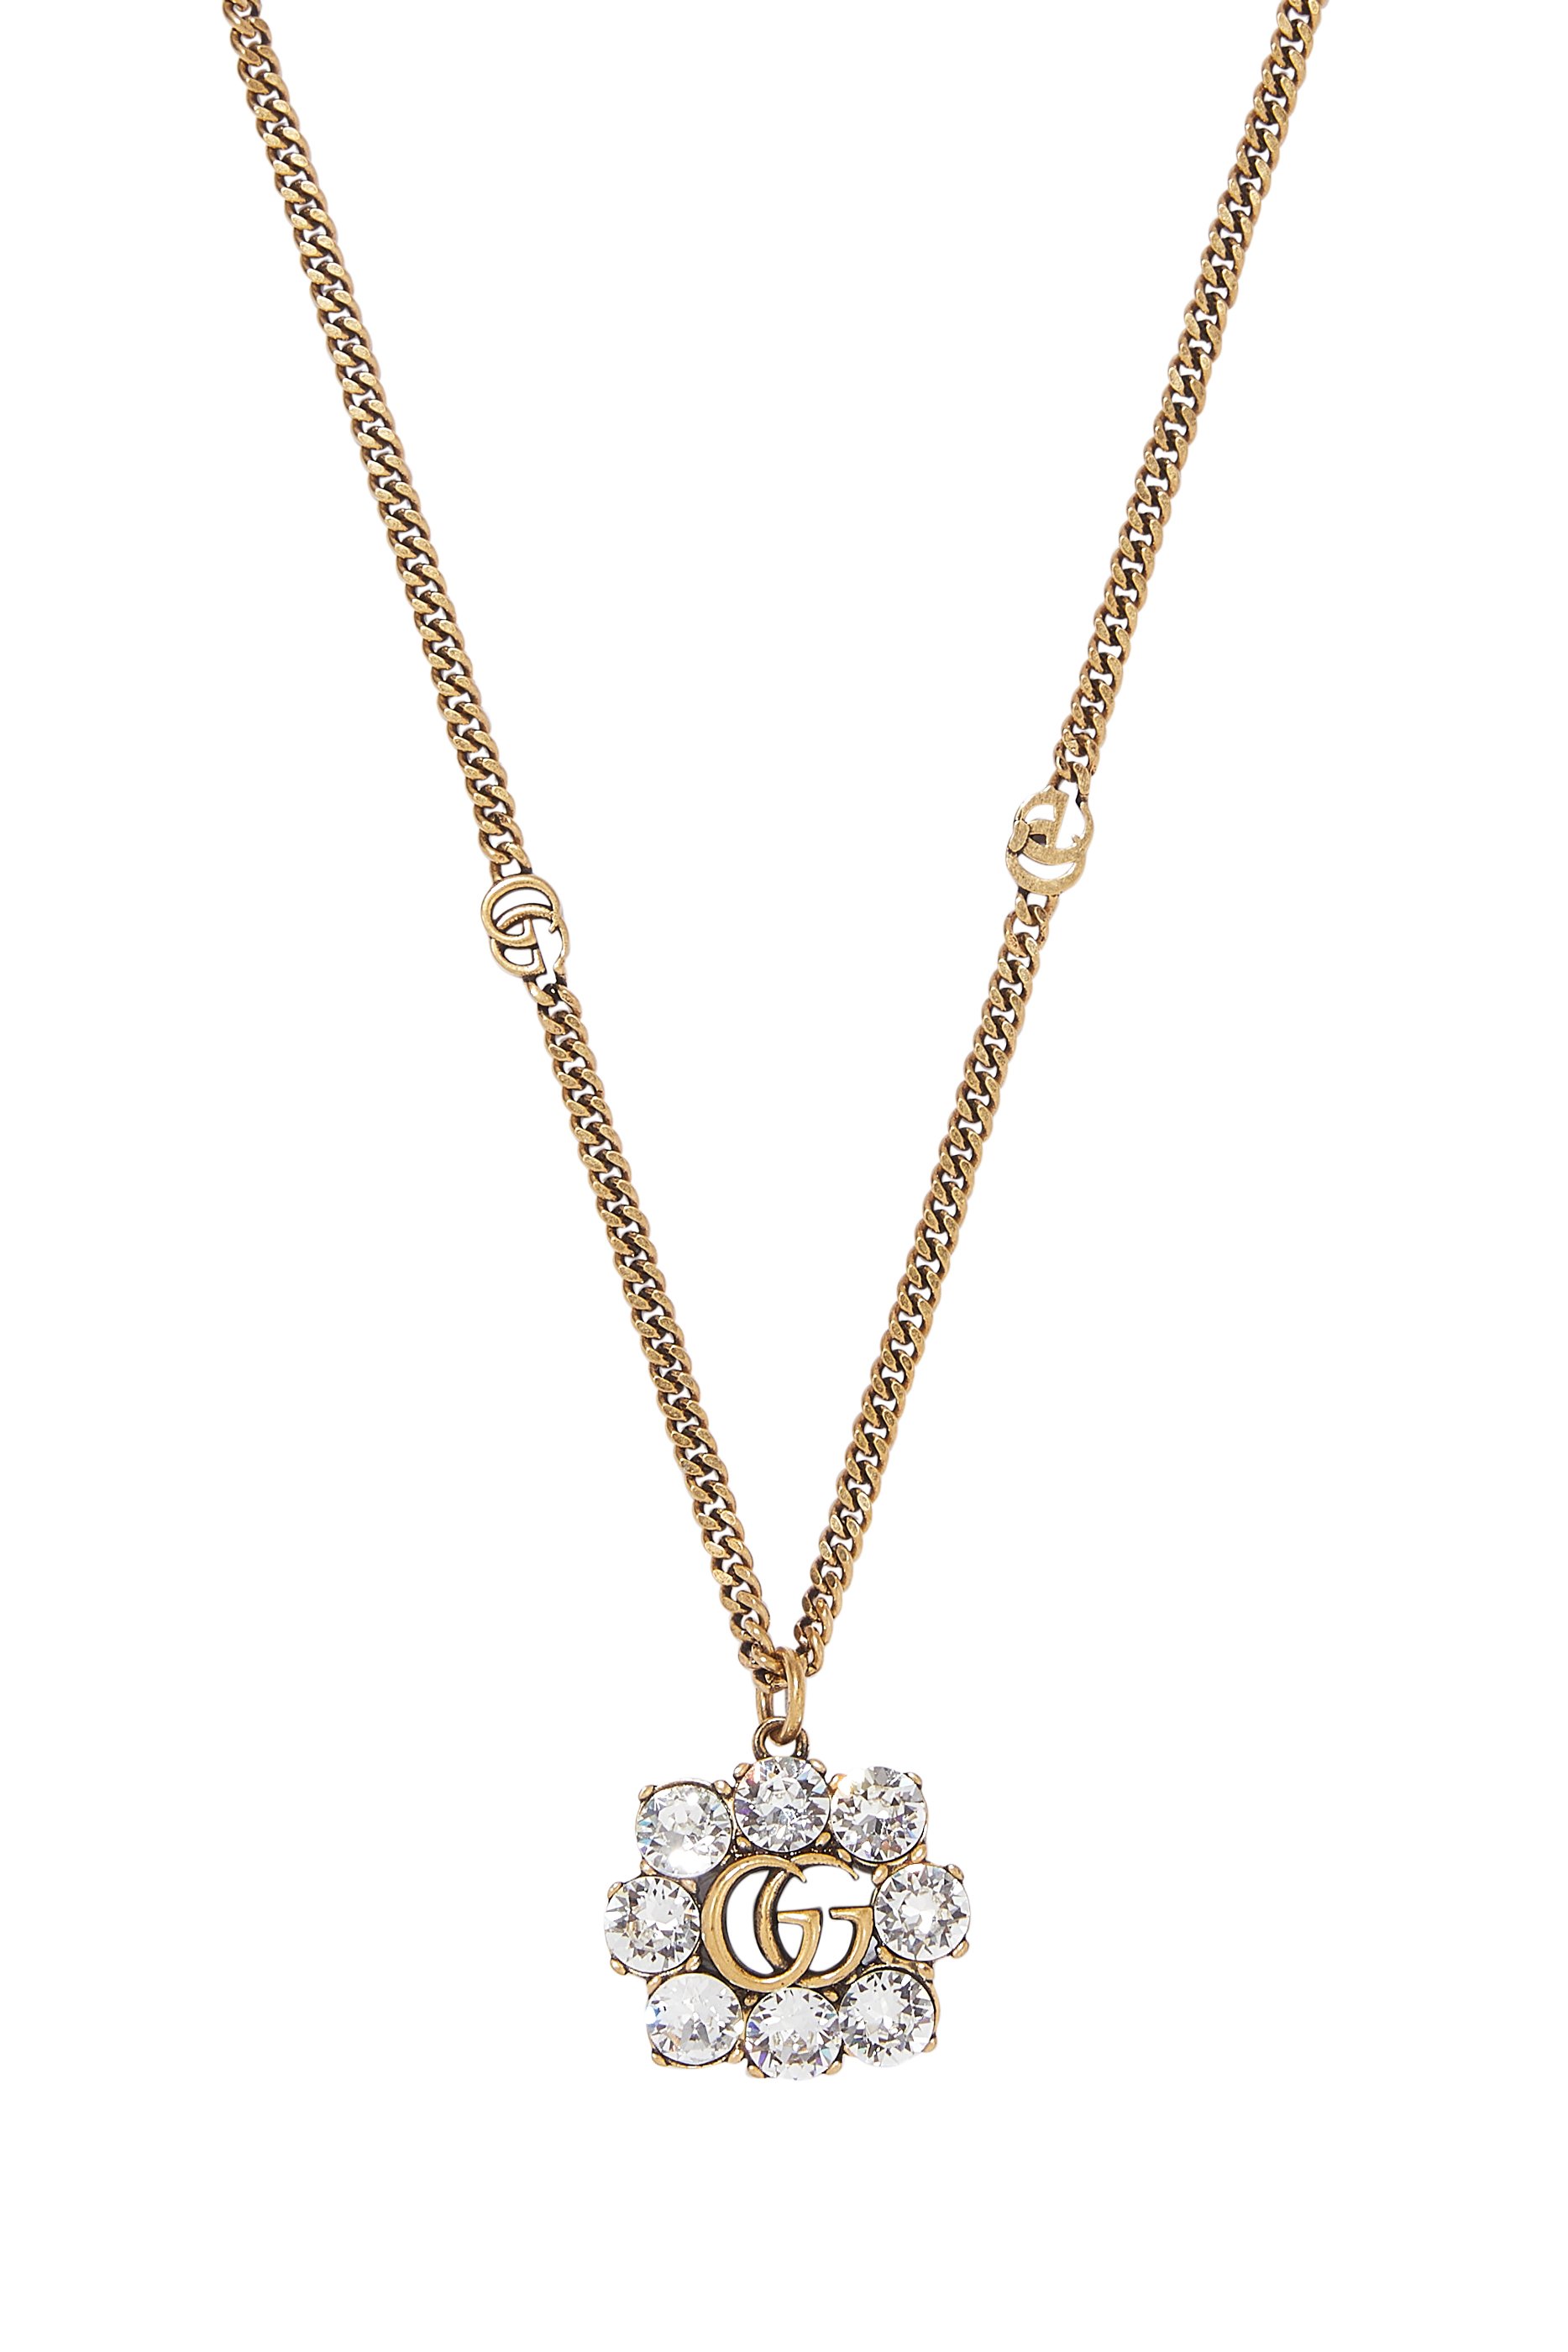 Buy Gucci Crystal Double G Necklace for Womens | Bloomingdale's UAE